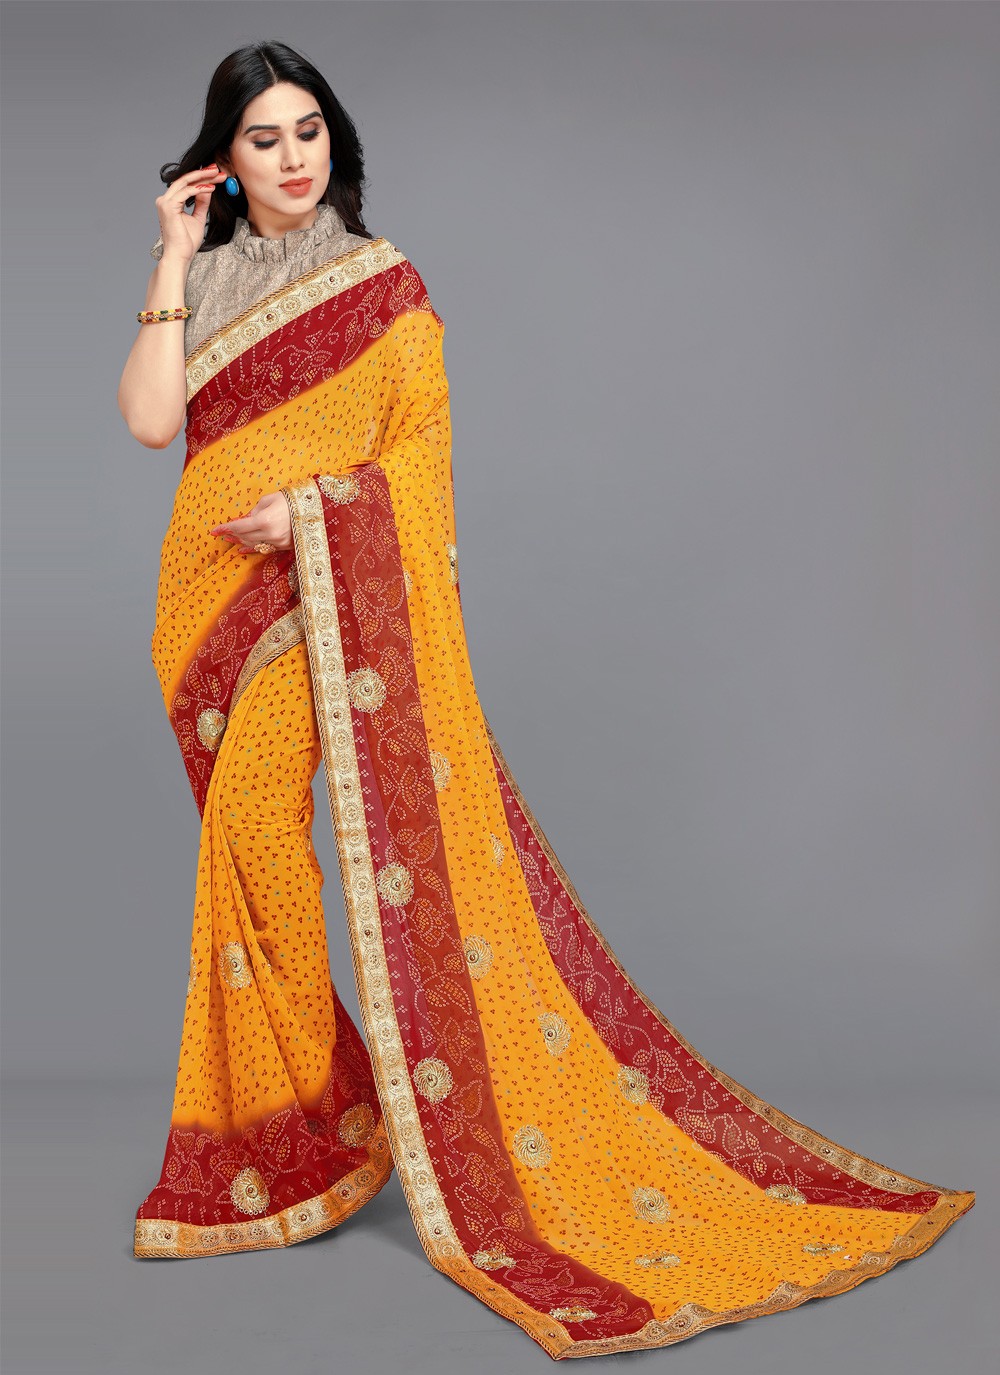 Embroidered Faux Georgette Classic Designer Saree in Mustard and Red